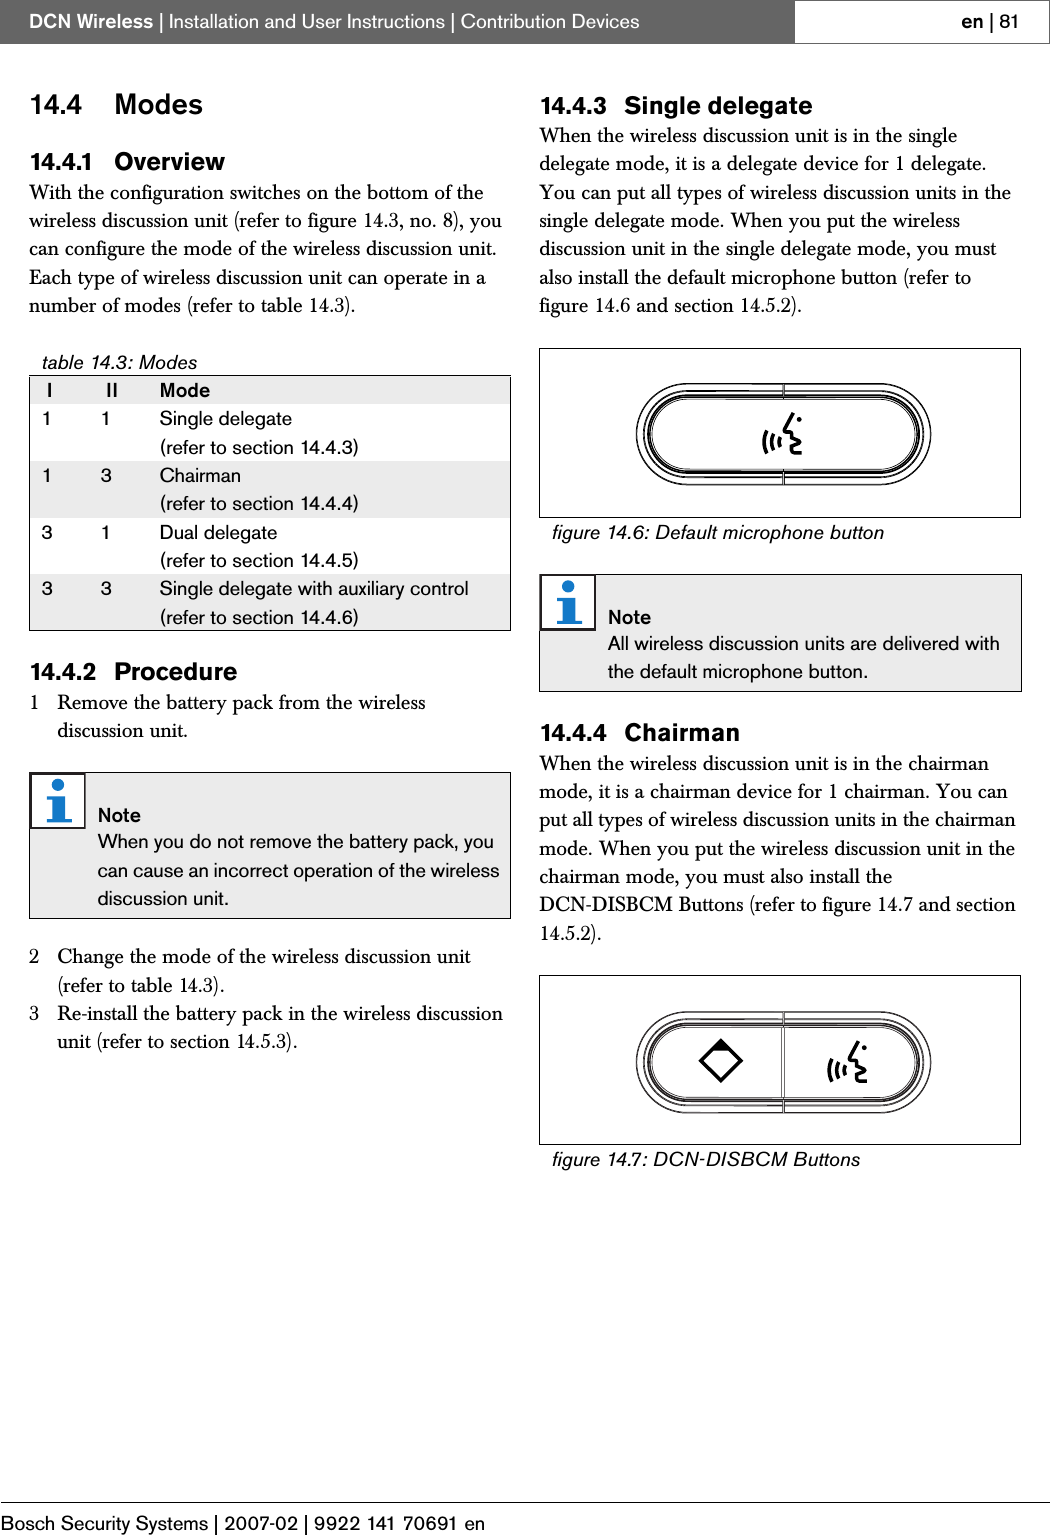 Page 52 of Bosch Security Systems DCNWAP Wireless Access Point User Manual Part 2